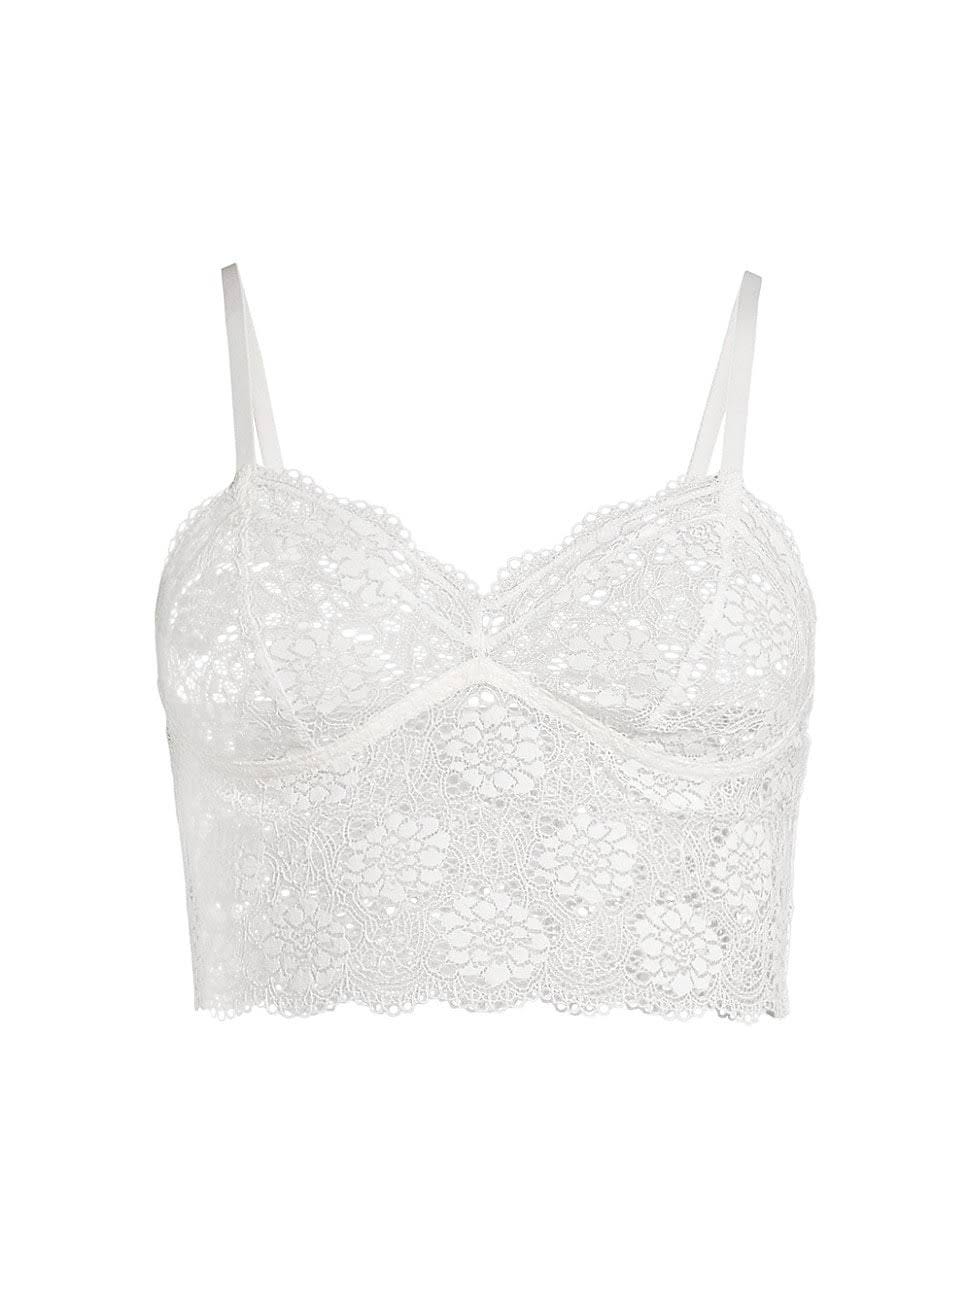 Off-White Peony Lace Cami Top (Size Small) | Image